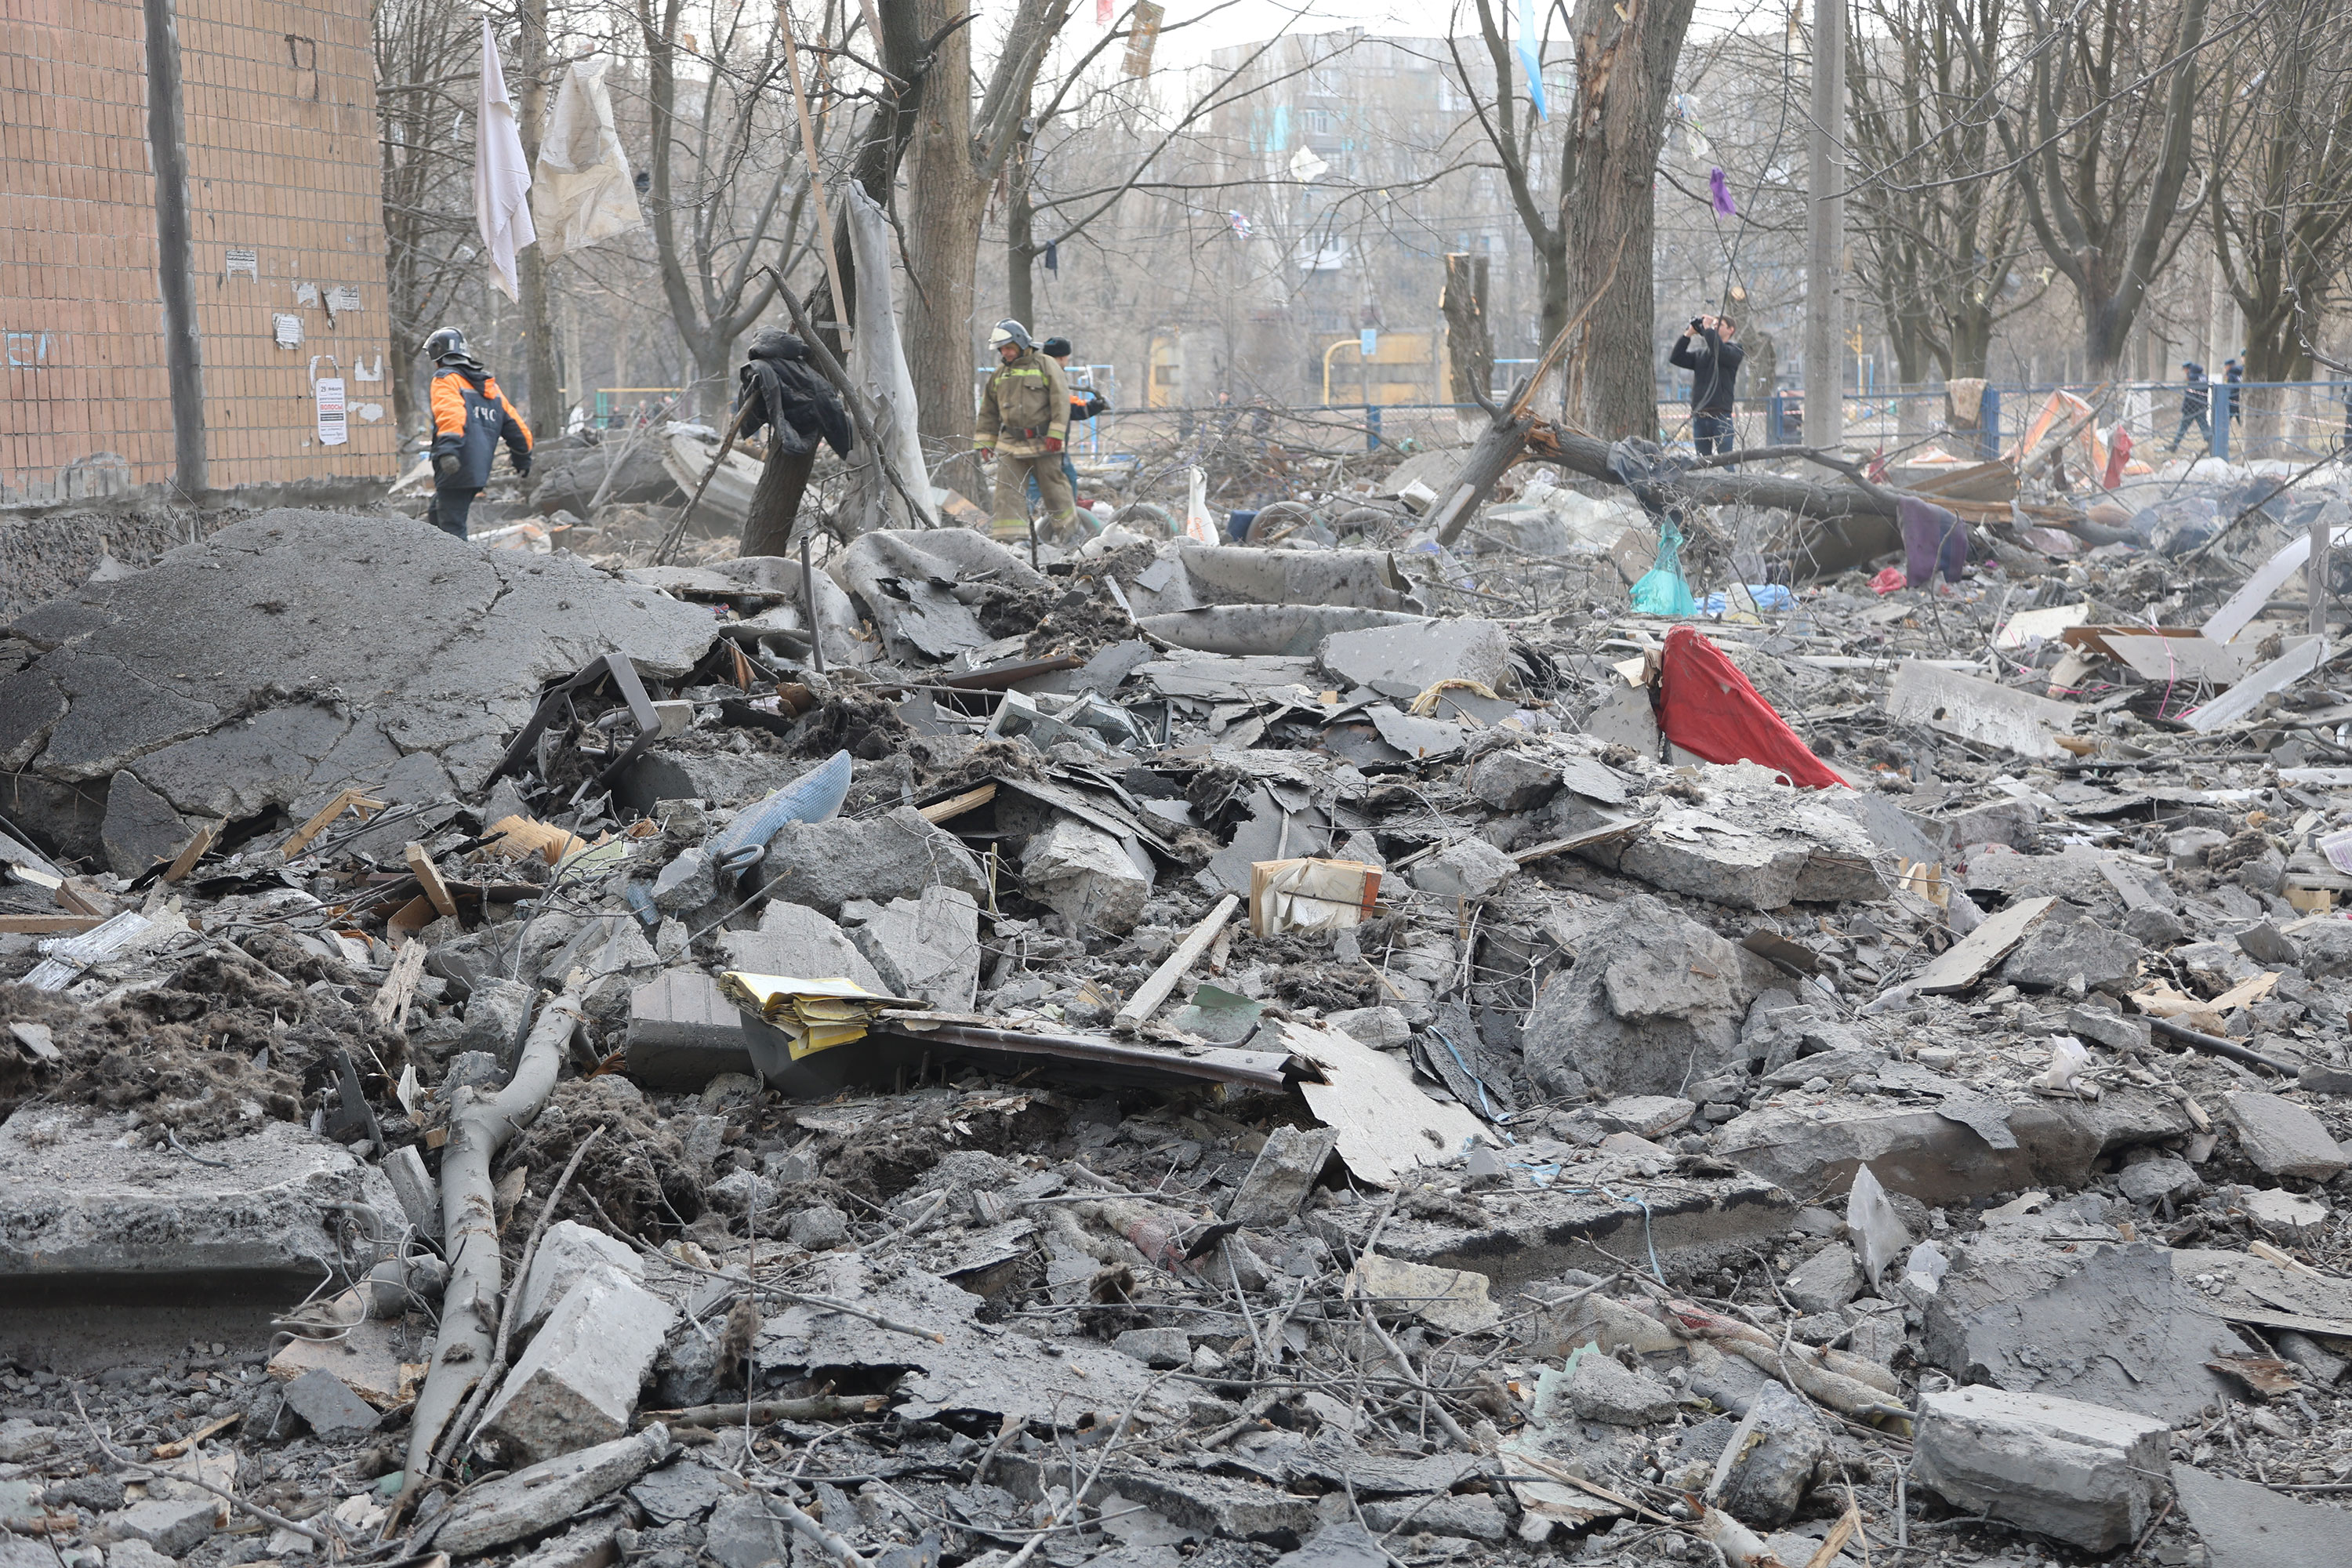 Damage is seen after shelling in the Donetsk region in Ukraine on March 30.